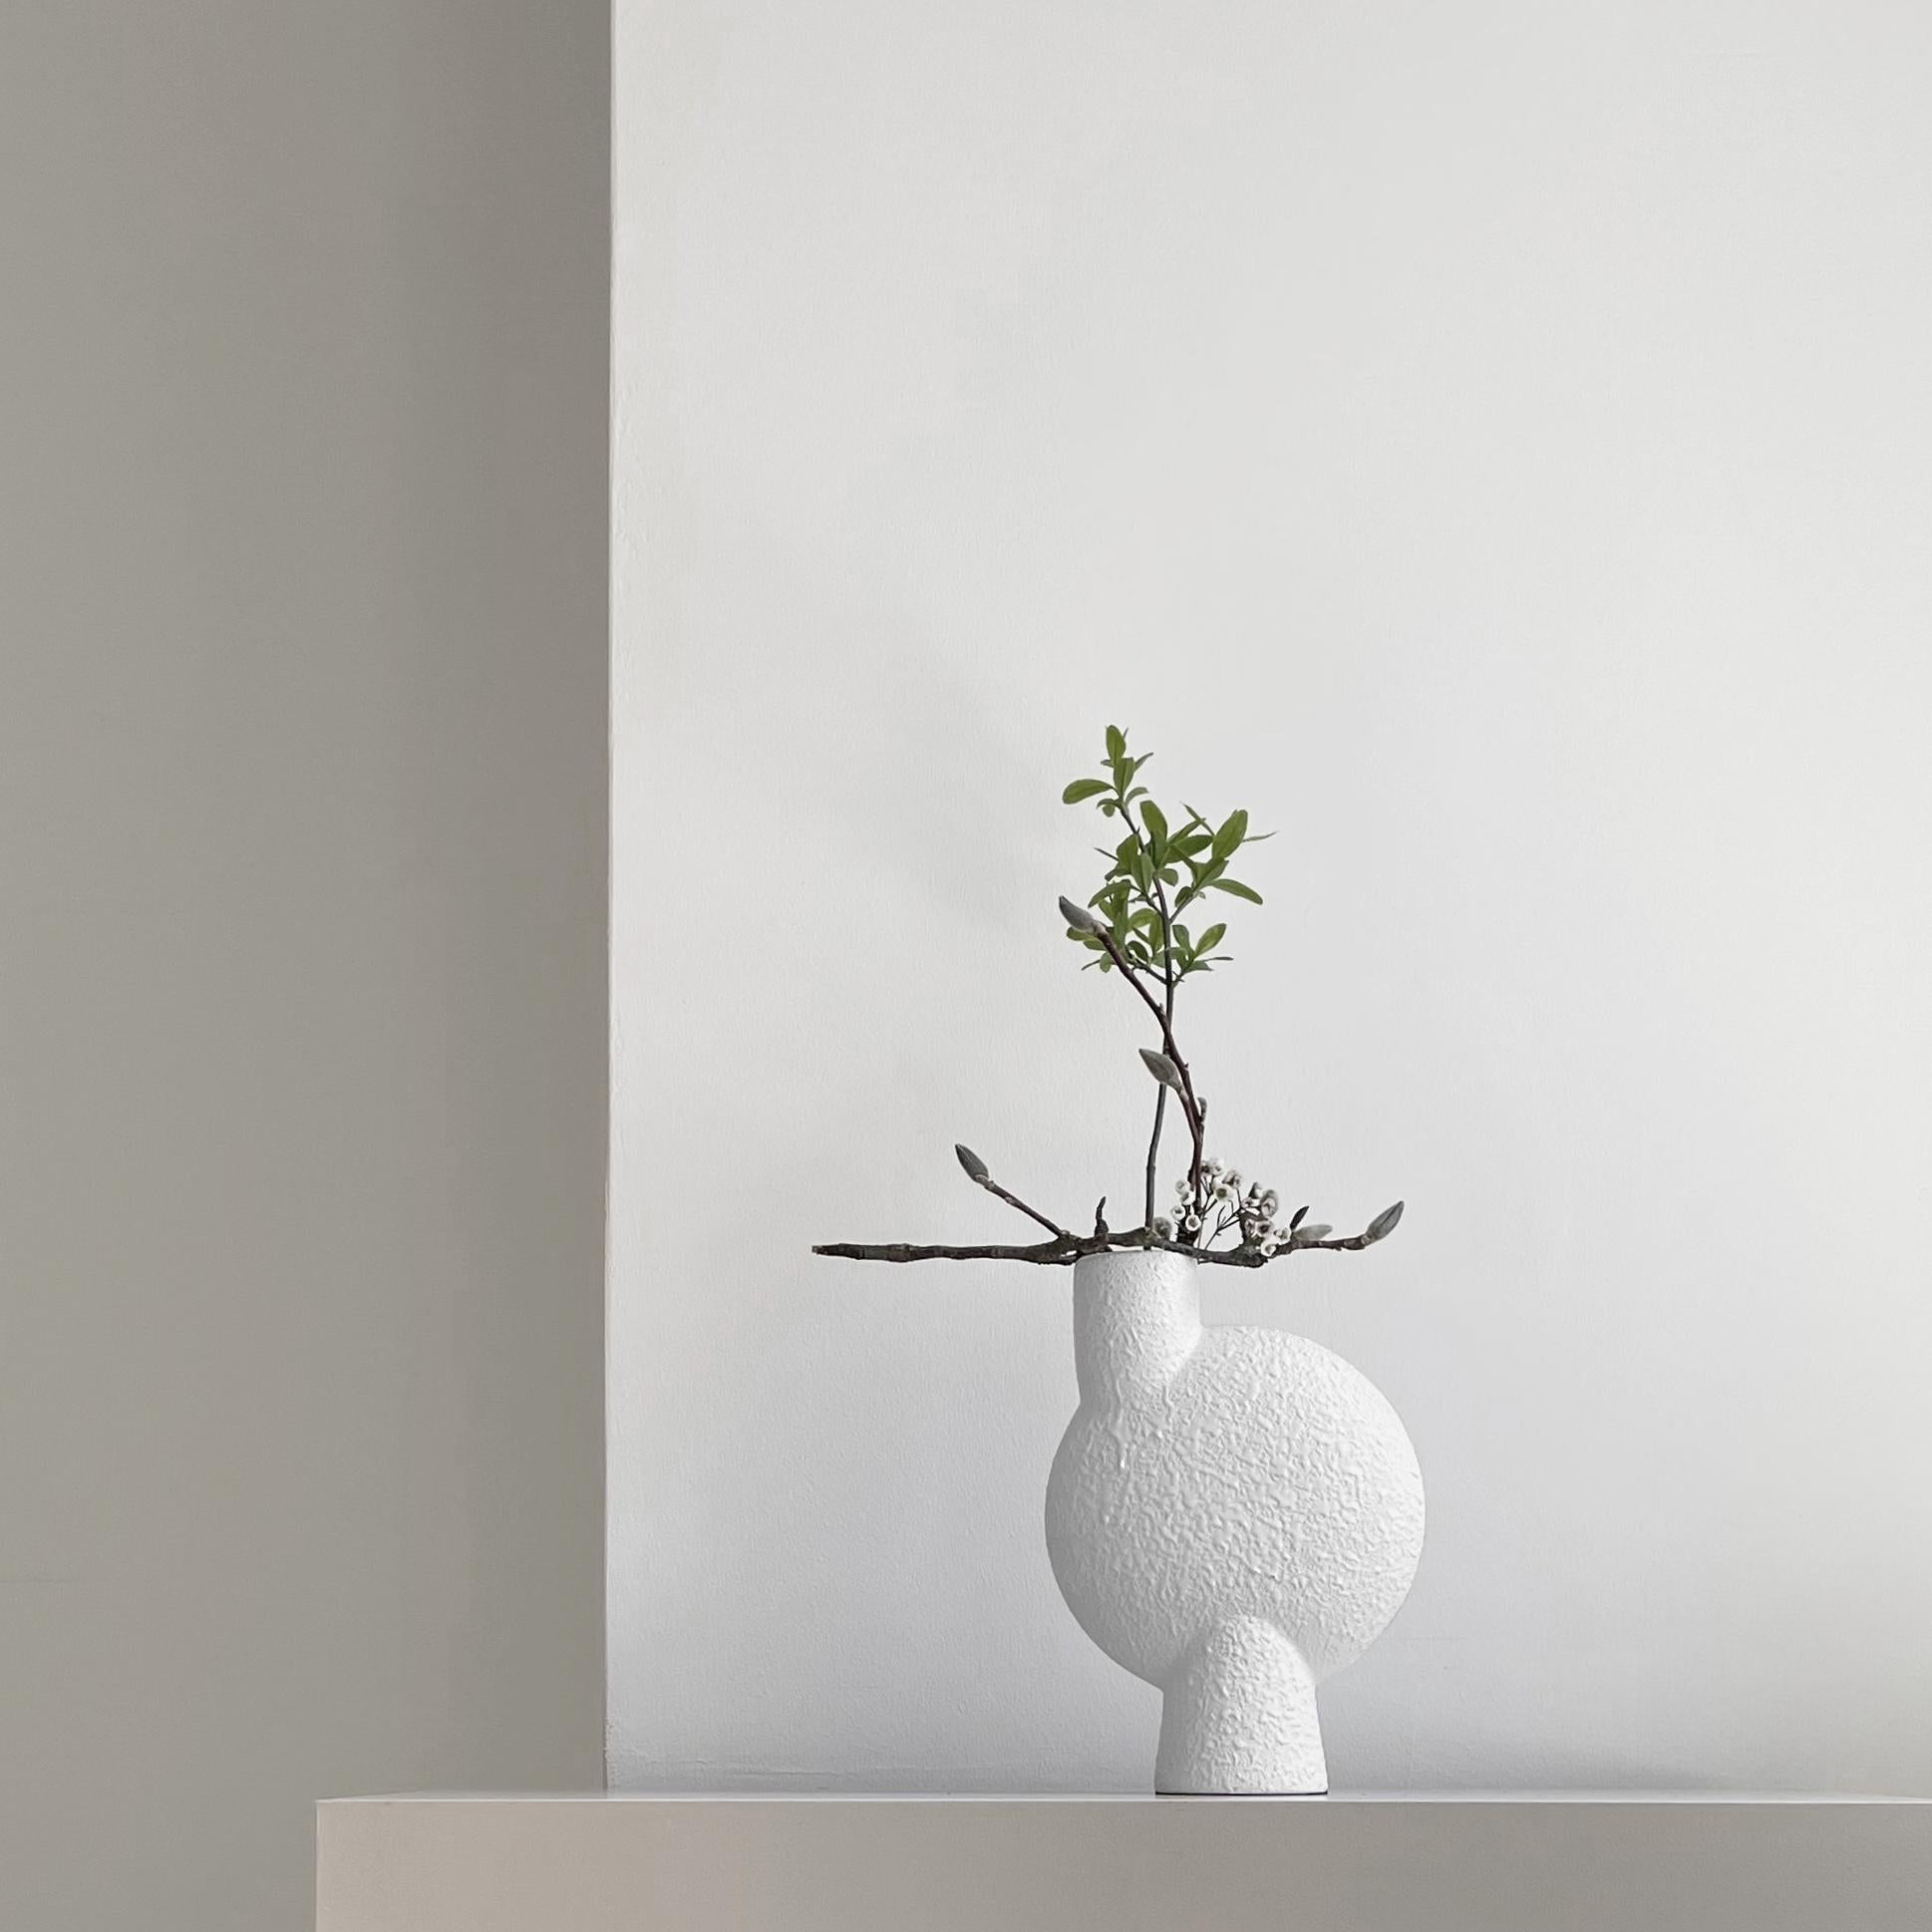 A set of 4 white medio sphere vase bubl by 101 Copenhagen
Designed by Kristian Sofus Hansen & Tommy Hyldahl
Dimensions: L18 / W8 / H26 CM
Materials: Ceramic

The Sphere collection celebrates unique silhouettes and textures that makes an impact